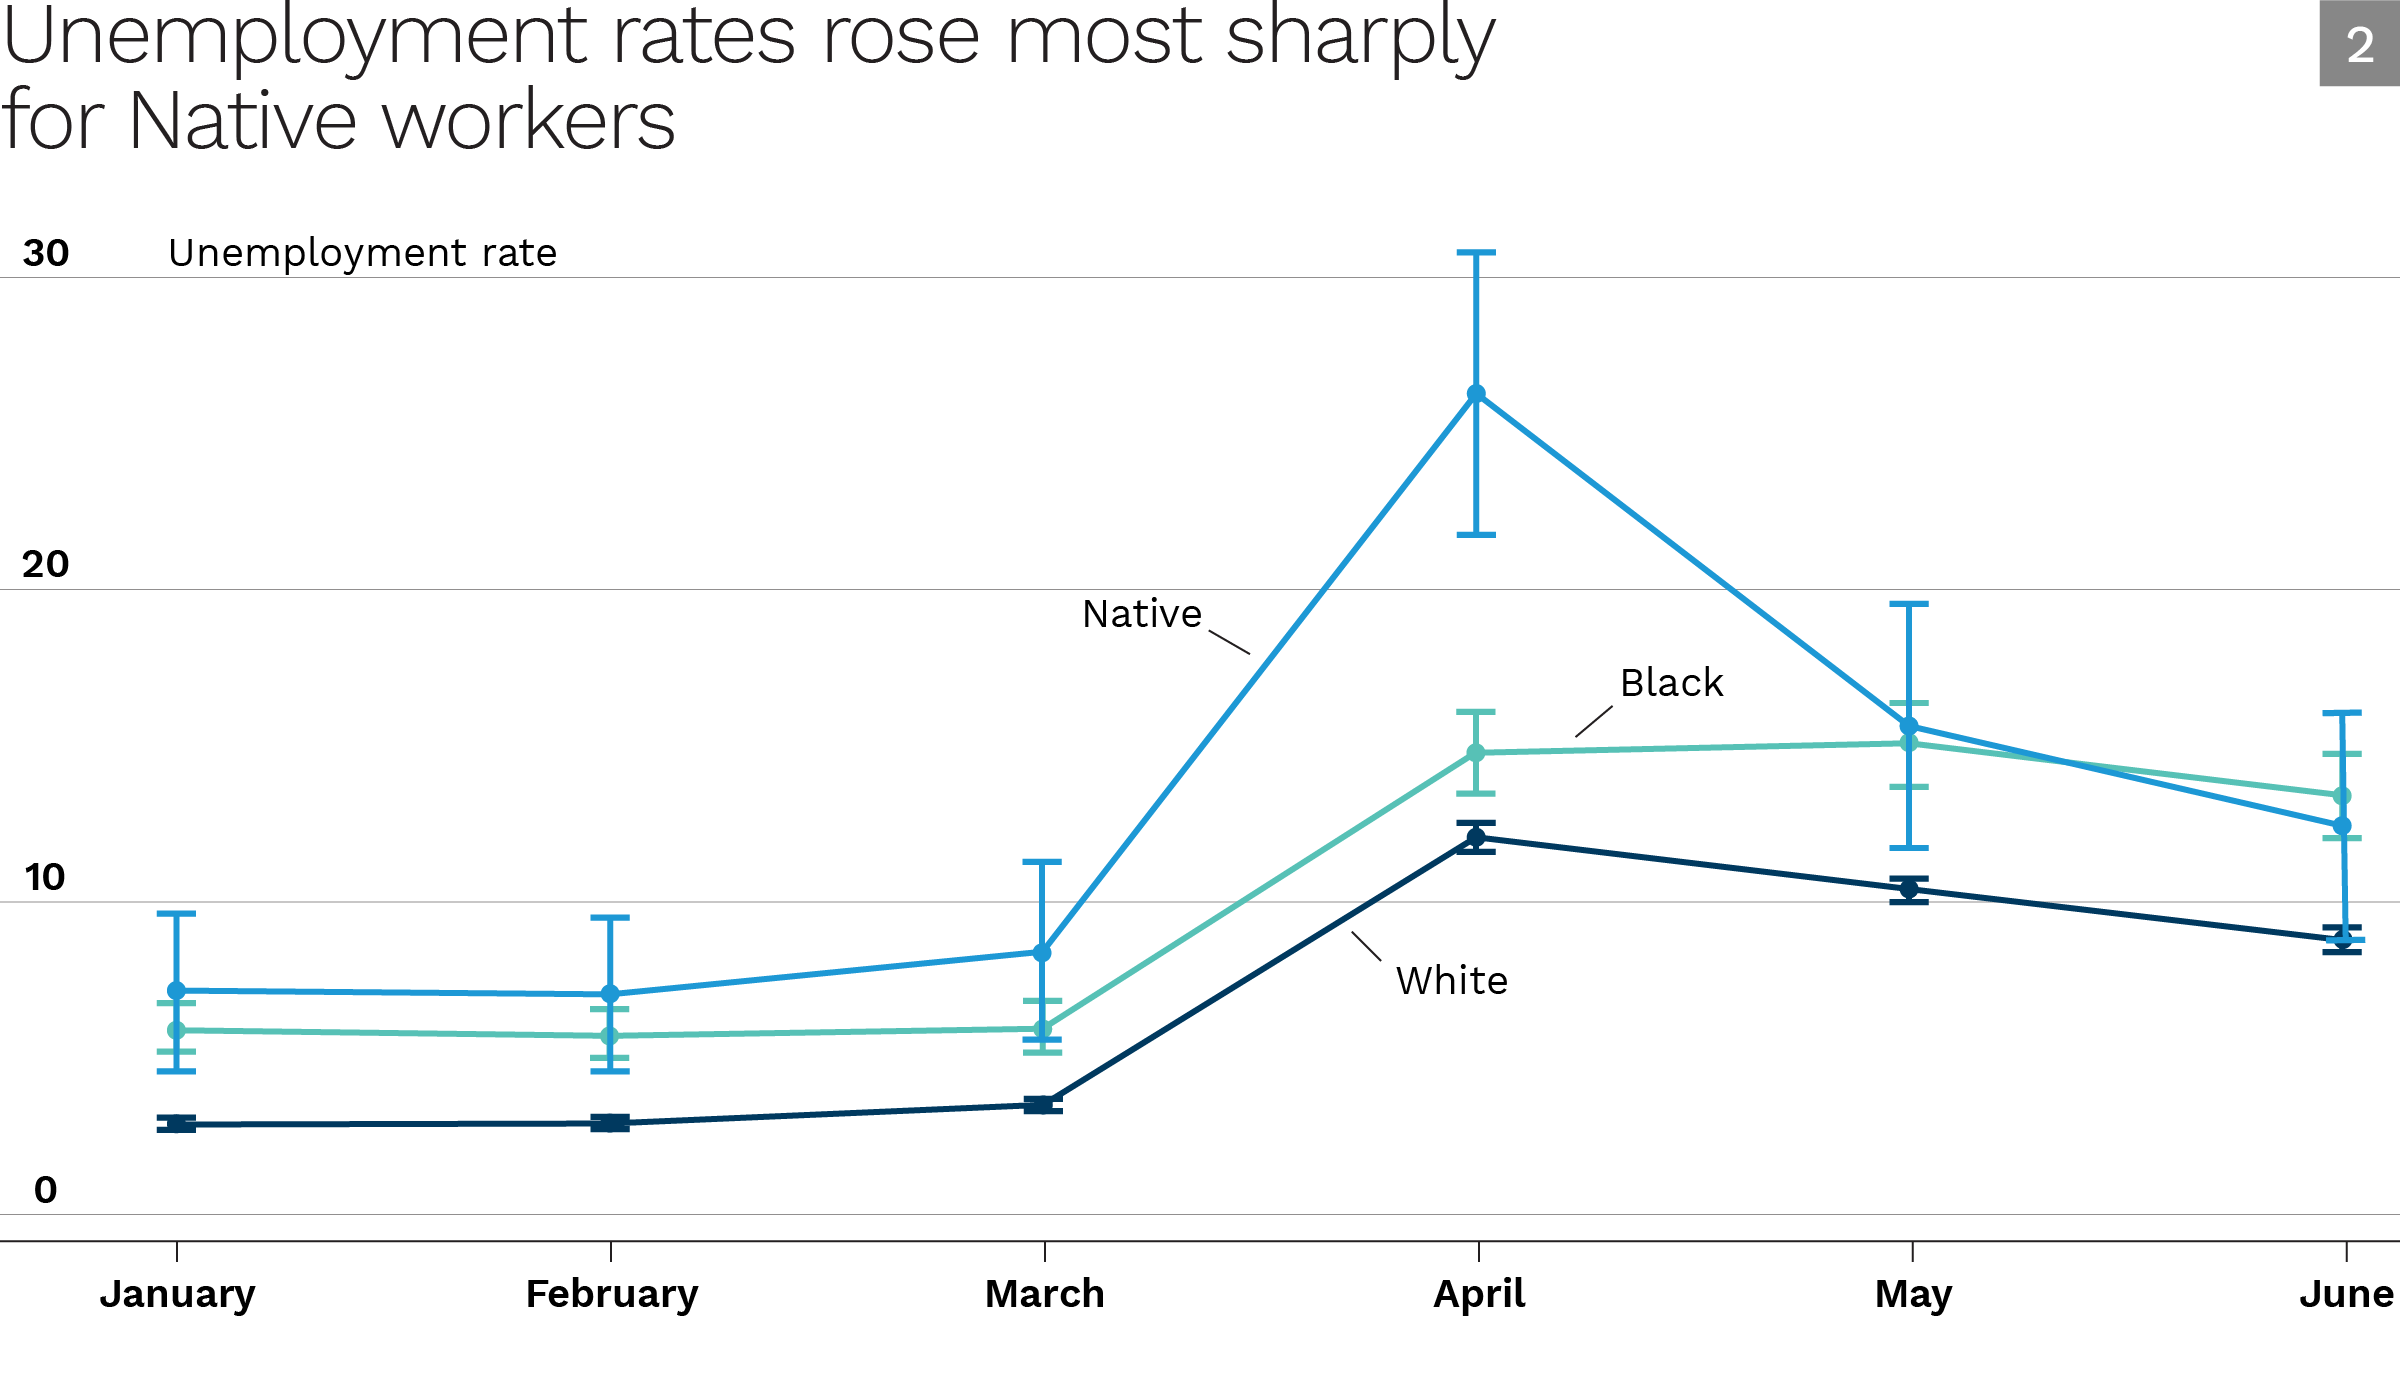 Figure 2: Unemployment rates rose most sharply for Native workers